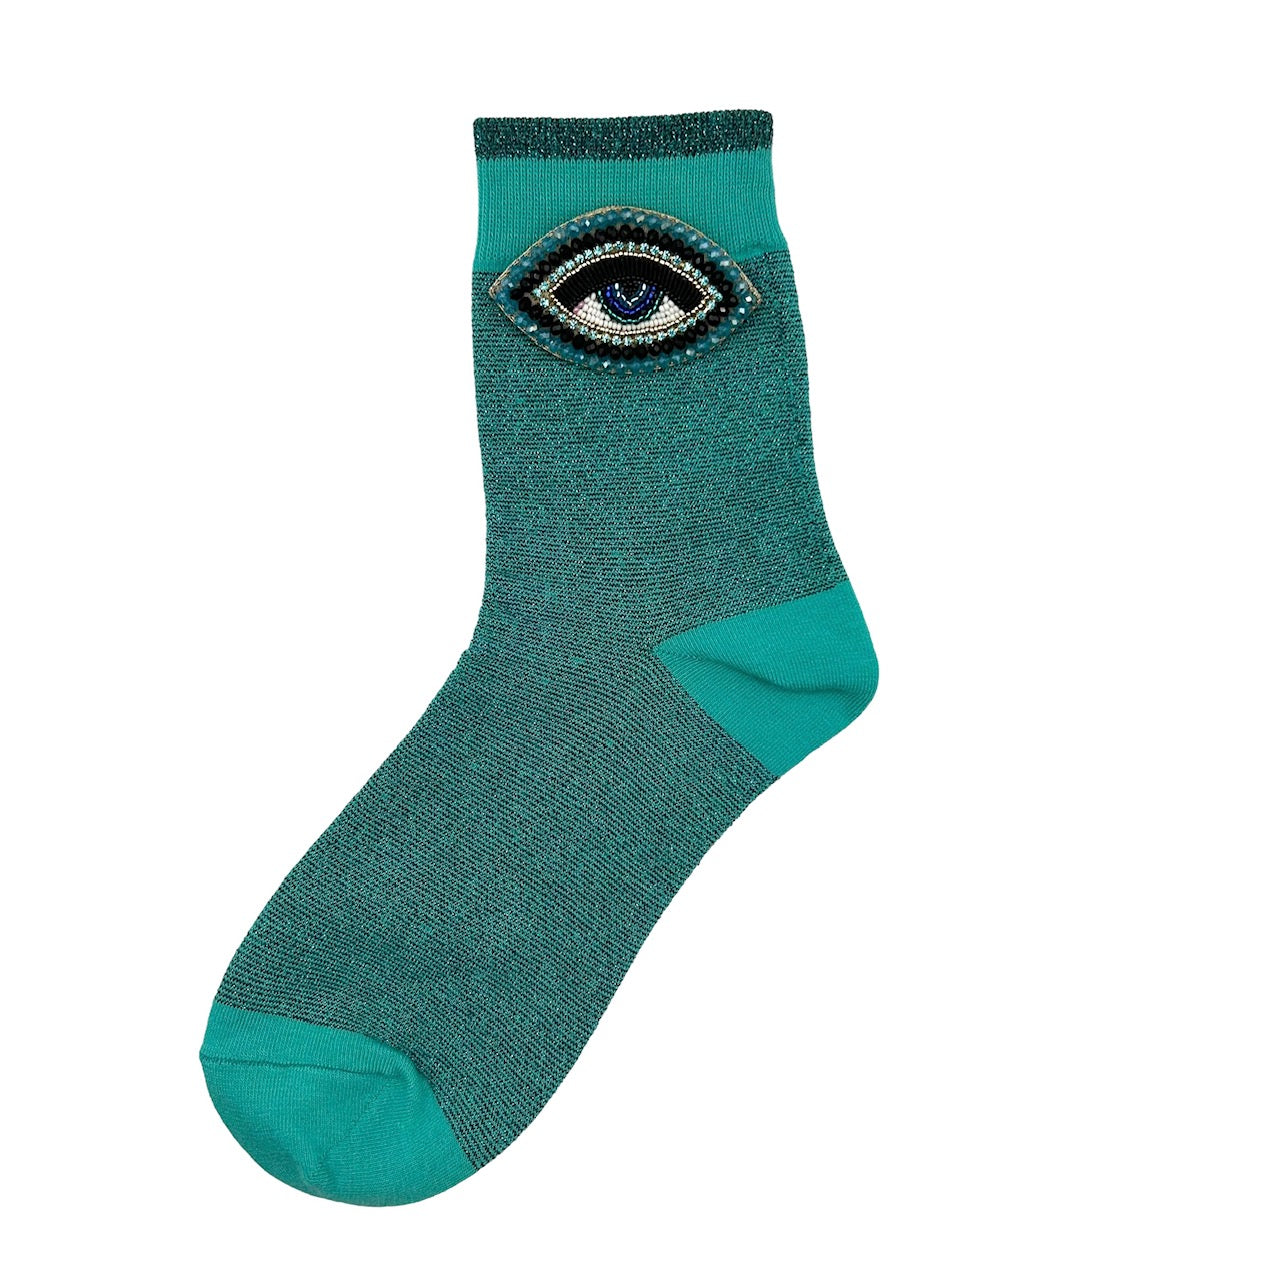 Tokyo socks in turquoise with a turquoise eye brooch